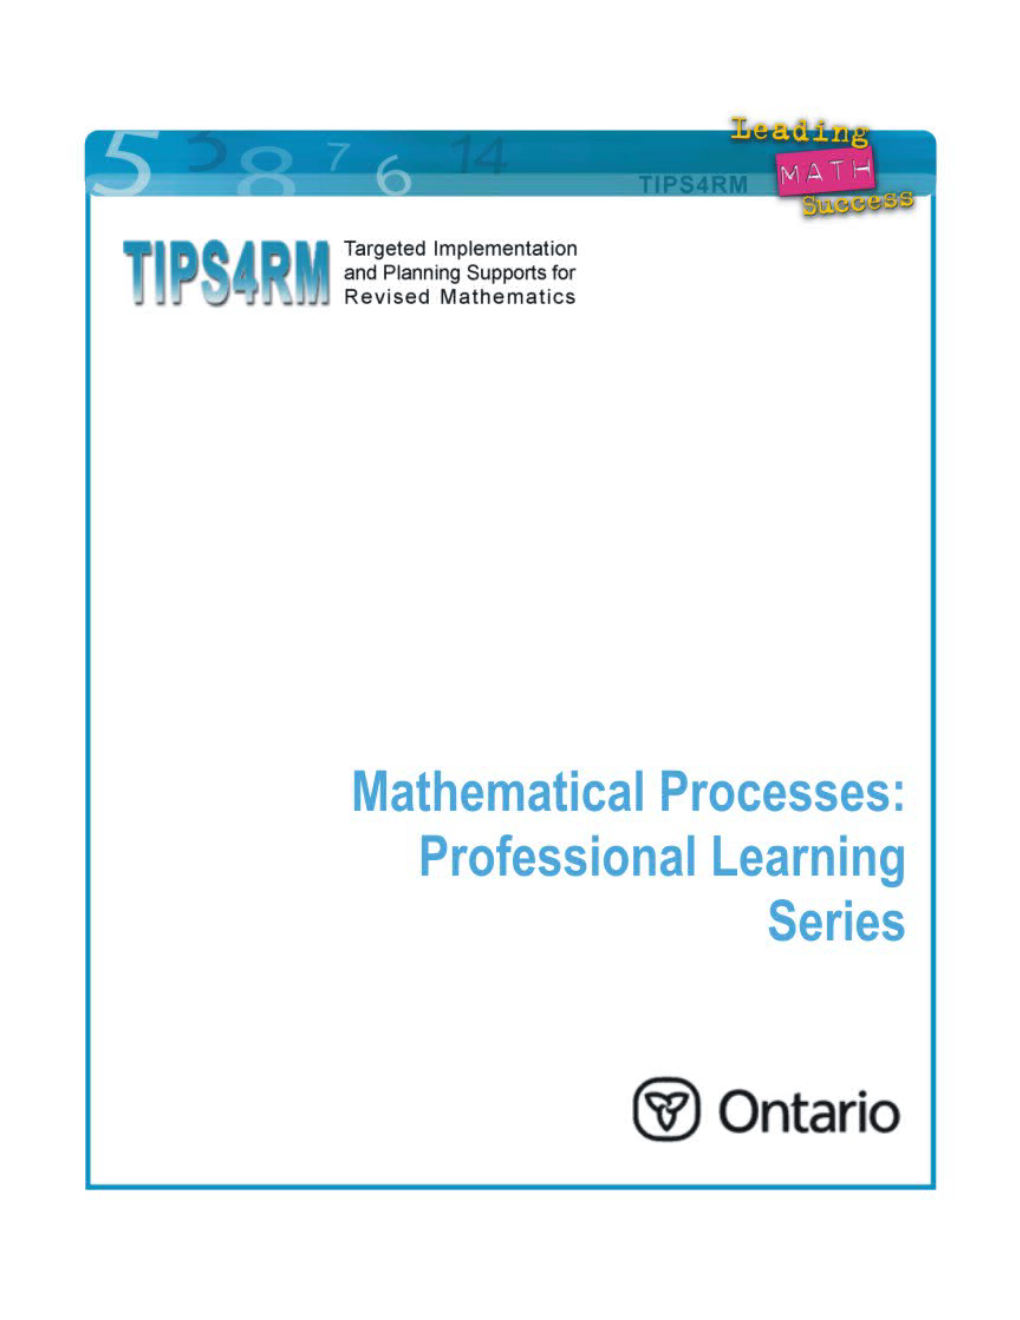 Professional Learning Opportunity for Mathematical Processes